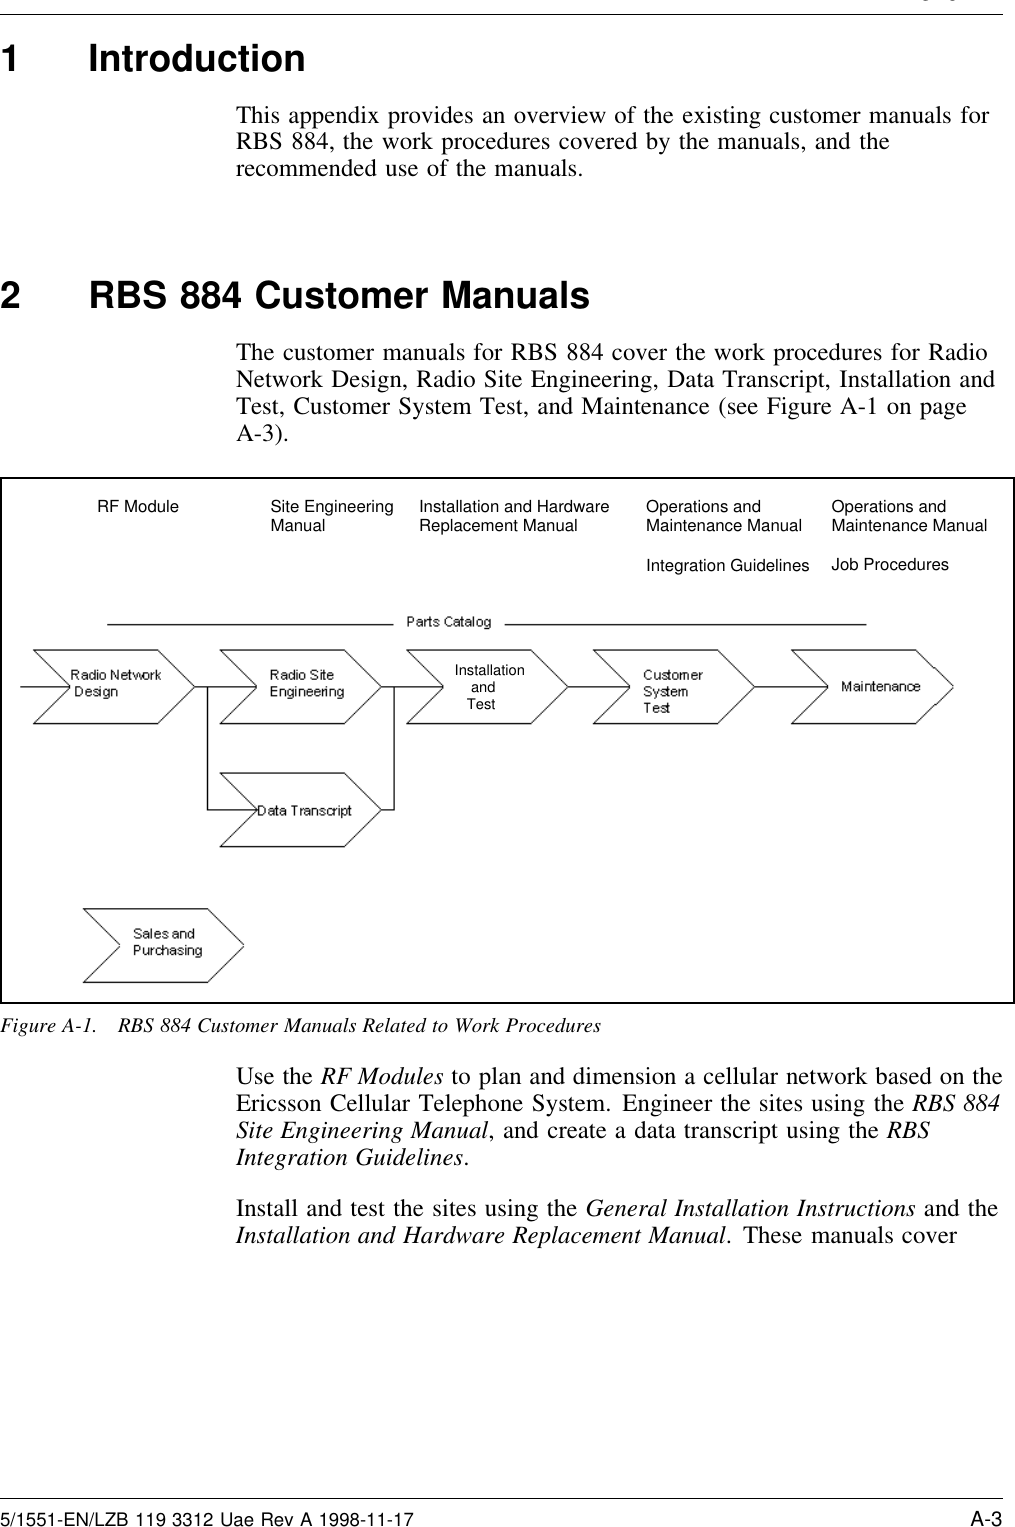 A endix A1 IntroductionThis appendix provides an overview of the existing customer manuals forRBS 884, the work procedures covered by the manuals, and therecommended use of the manuals.2 RBS 884 Customer ManualsThe customer manuals for RBS 884 cover the work procedures for RadioNetwork Design, Radio Site Engineering, Data Transcript, Installation andTest, Customer System Test, and Maintenance (see Figure A-1 on pageA-3).RF Module Site EngineeringManual Installation and Hardware Replacement Manual Operations and Maintenance ManualJob ProceduresInstallation    and   TestOperations and Maintenance ManualIntegration GuidelinesFigure A-1. RBS 884 Customer Manuals Related to Work ProceduresUse the RF Modules to plan and dimension a cellular network based on theEricsson Cellular Telephone System. Engineer the sites using the RBS 884Site Engineering Manual, and create a data transcript using the RBSIntegration Guidelines.Install and test the sites using the General Installation Instructions and theInstallation and Hardware Replacement Manual. These manuals cover5/1551-EN/LZB 119 3312 Uae Rev A 1998-11-17 A-3